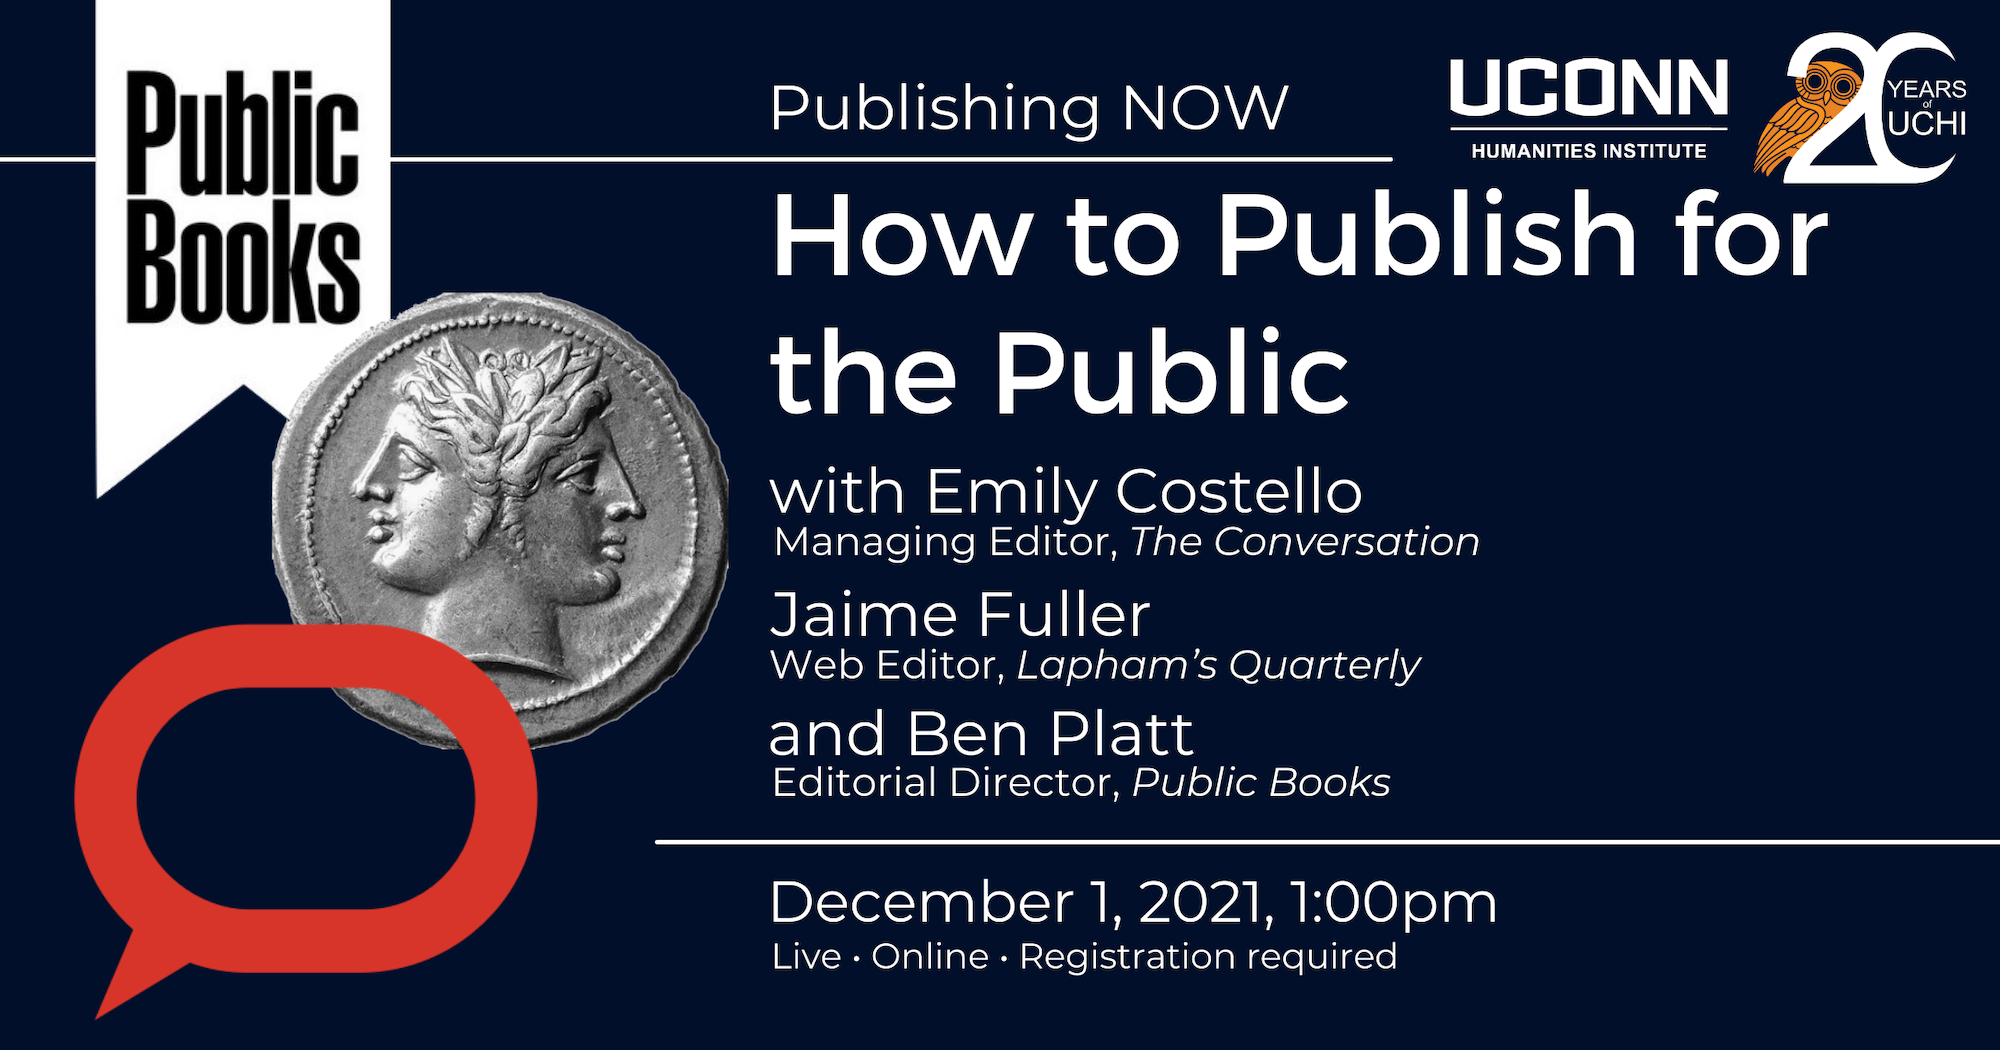 Publishing NOW: How to Publish for the Public, with Emily Costello (Managing Editor, the Conversation), Jaime Fuller (Web Editor, Lapham's Quarterly), Ben Platt (Editorial Director, Public Books). December 1, 2021, 1:00pm. Live. Online. Registration required.